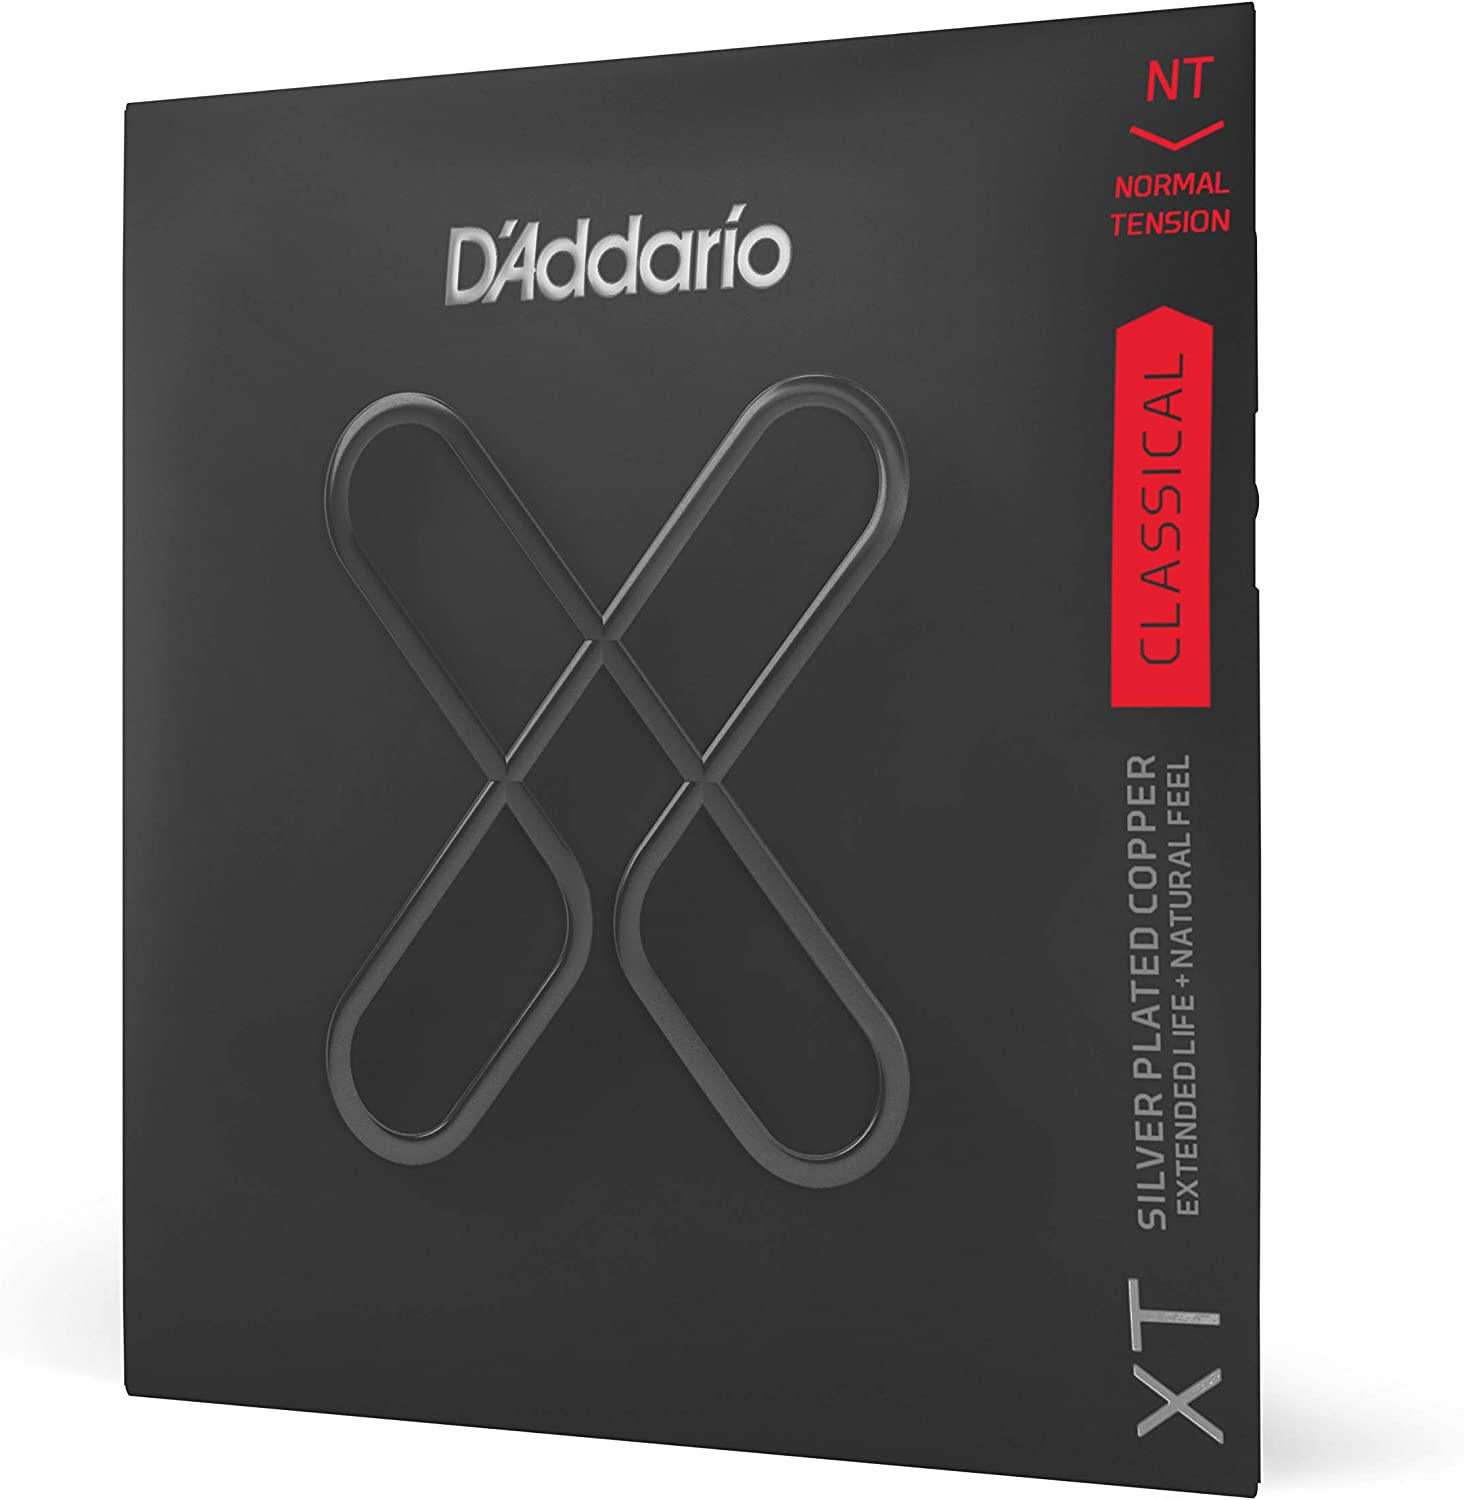 D'Addario XTC45 Coated Classical Guitar Strings on a white background